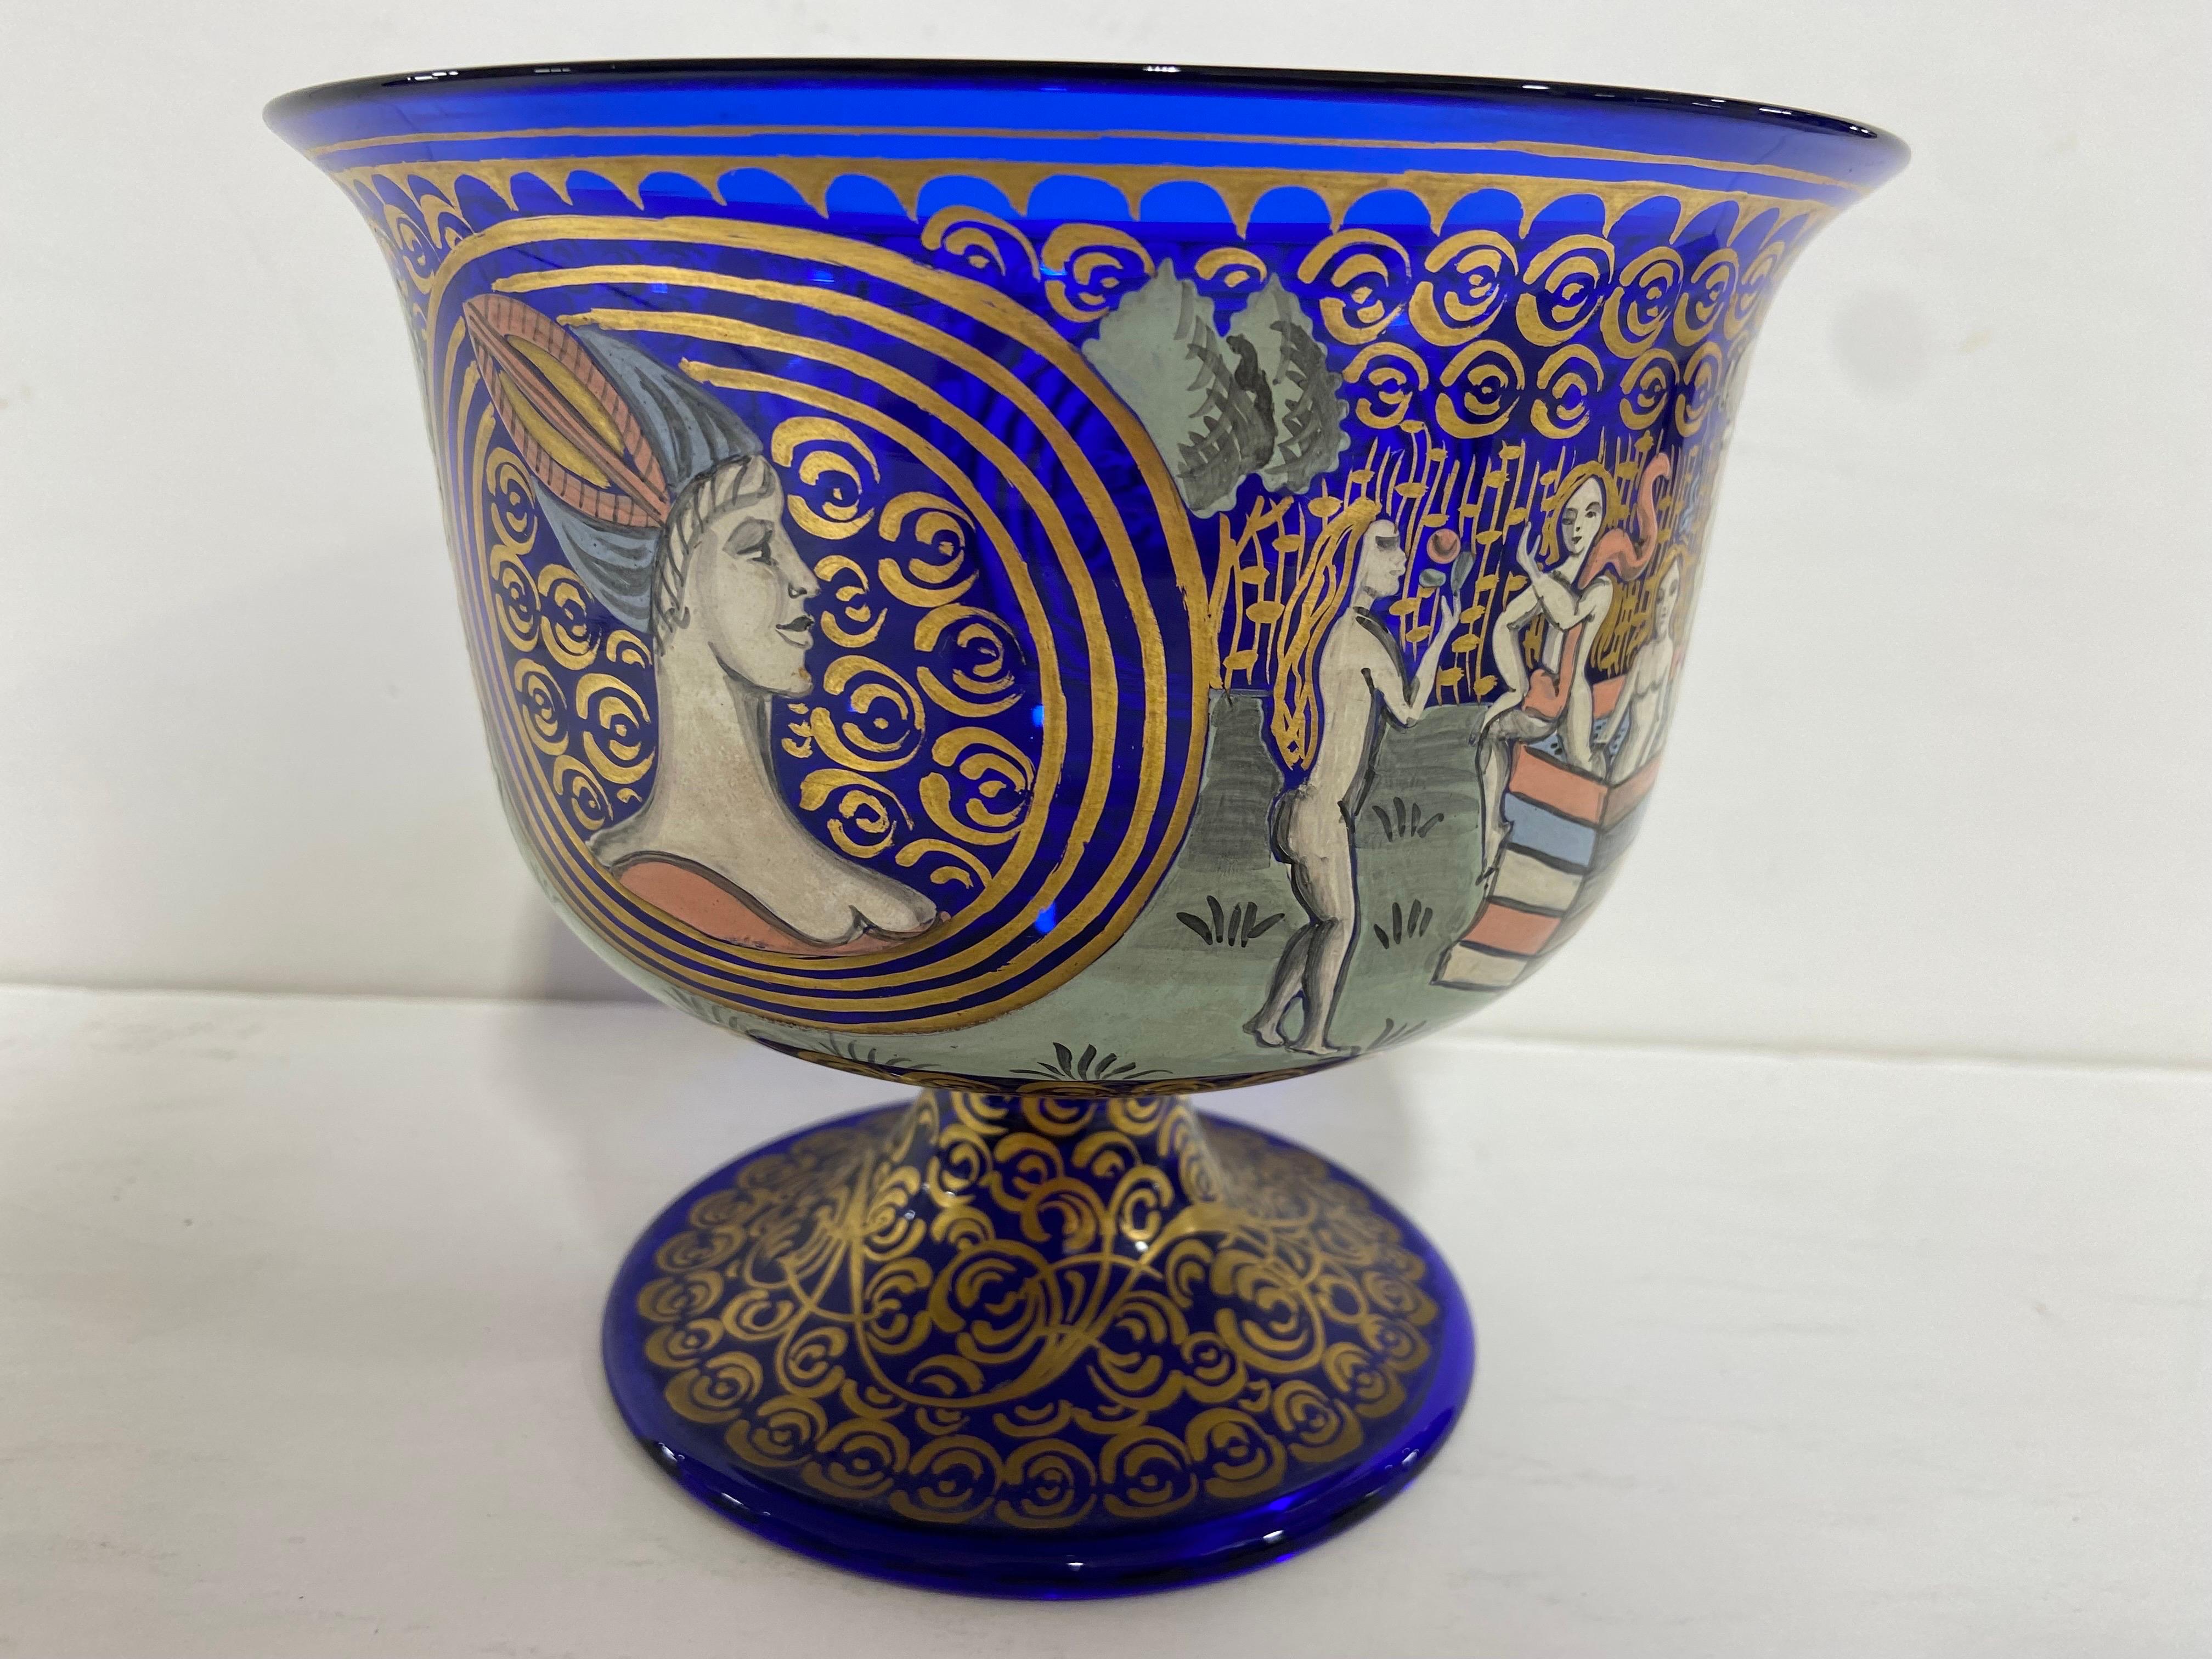 A Barovier and Toso design from Murano Italy. An Italian wedding cup dating to the mid 20th century created in cobalt blue glass with hand painted and gilt decoration. The bell shaped top is painted and decorated with Renaissance inspired painted